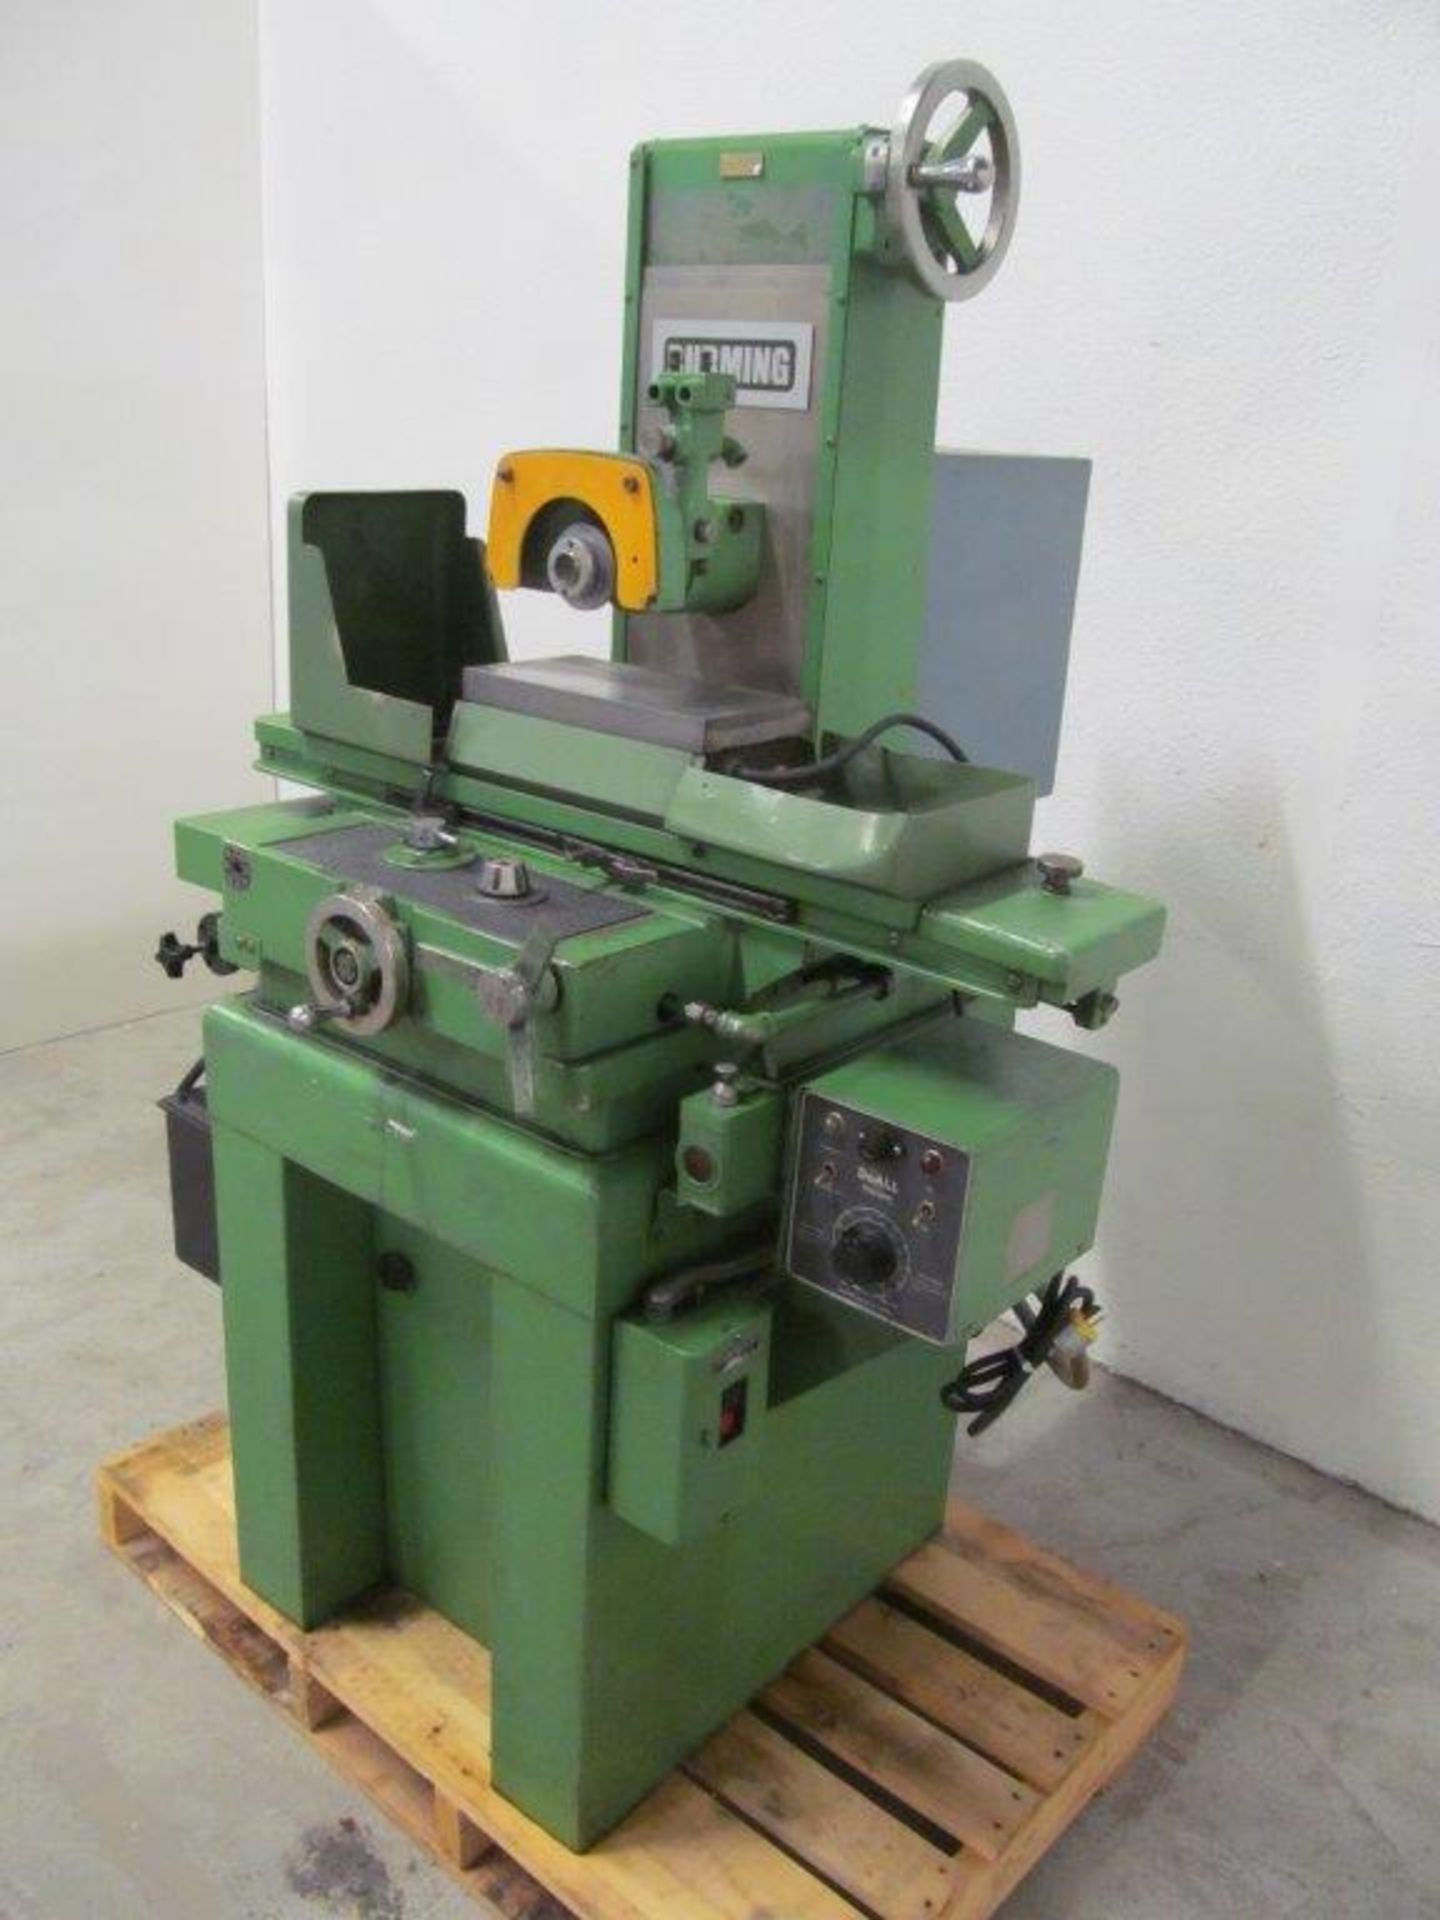 BURMING HYDRAULIC SURFACE GRINDER 6'' X 12'', C/W MAGNETIC CHUCK - Image 3 of 5